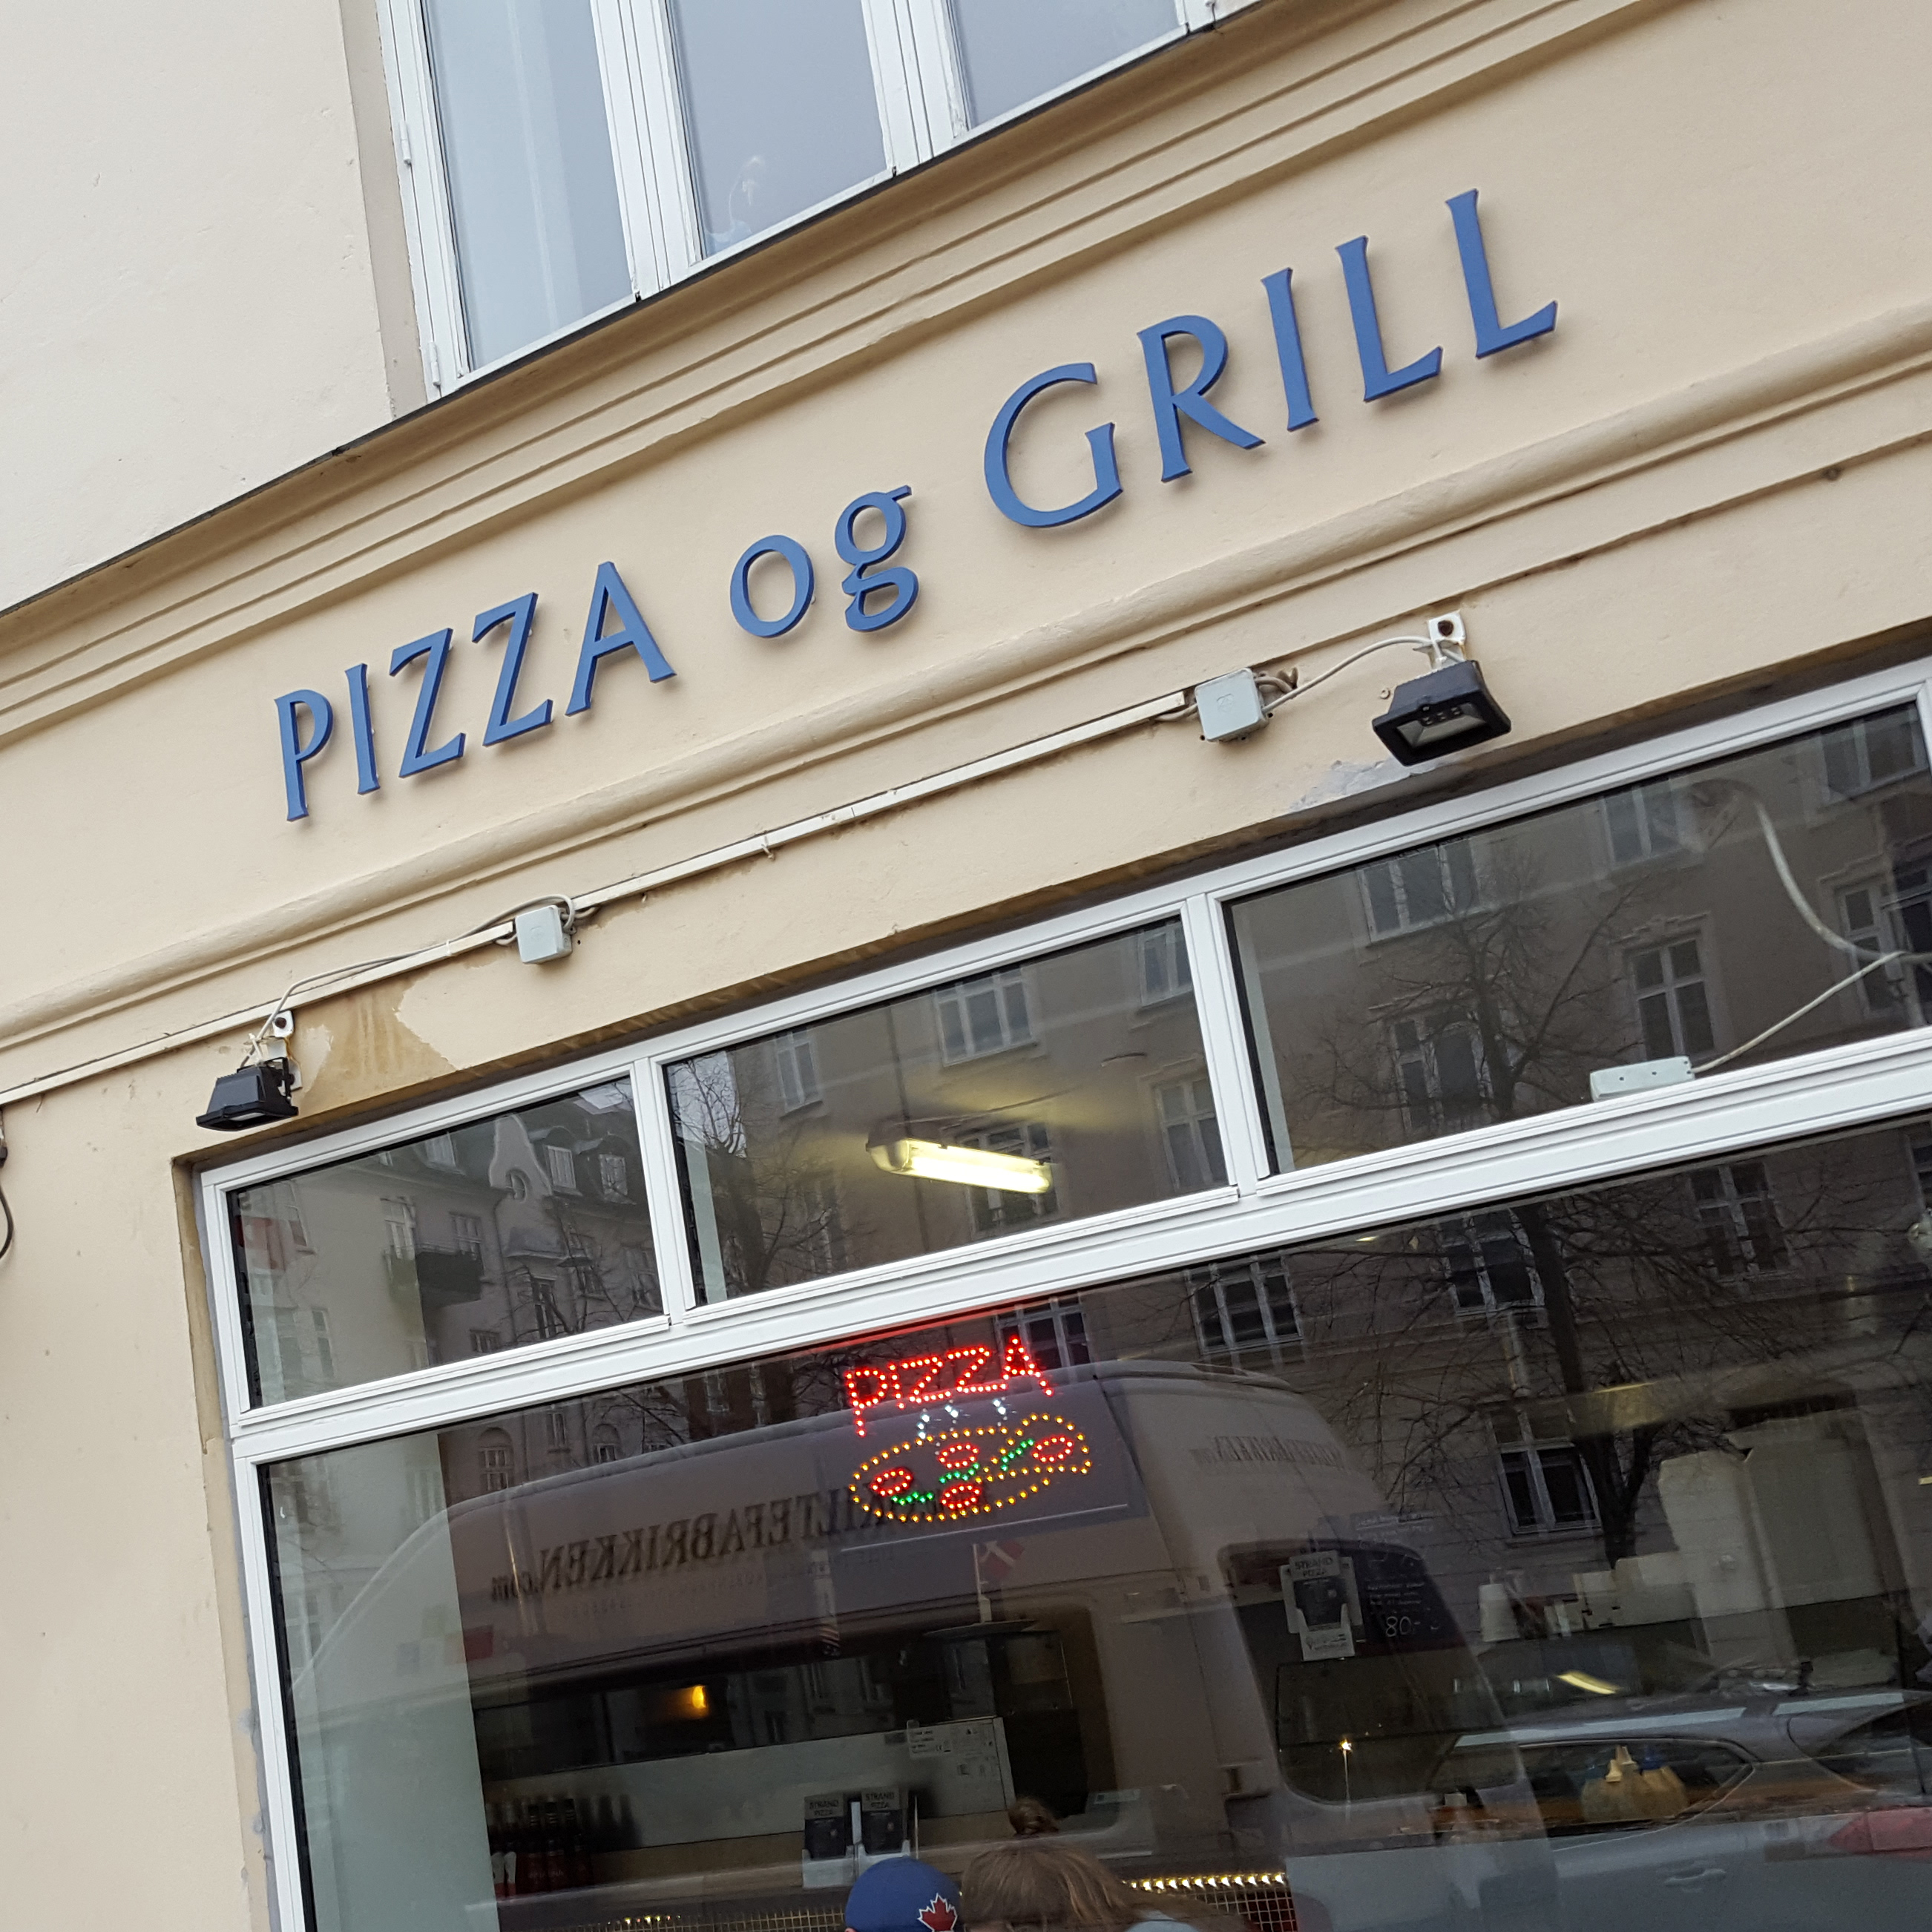 Lakerede akrylbogstaver // Lacquered acrylic letters - Pizza & Grill